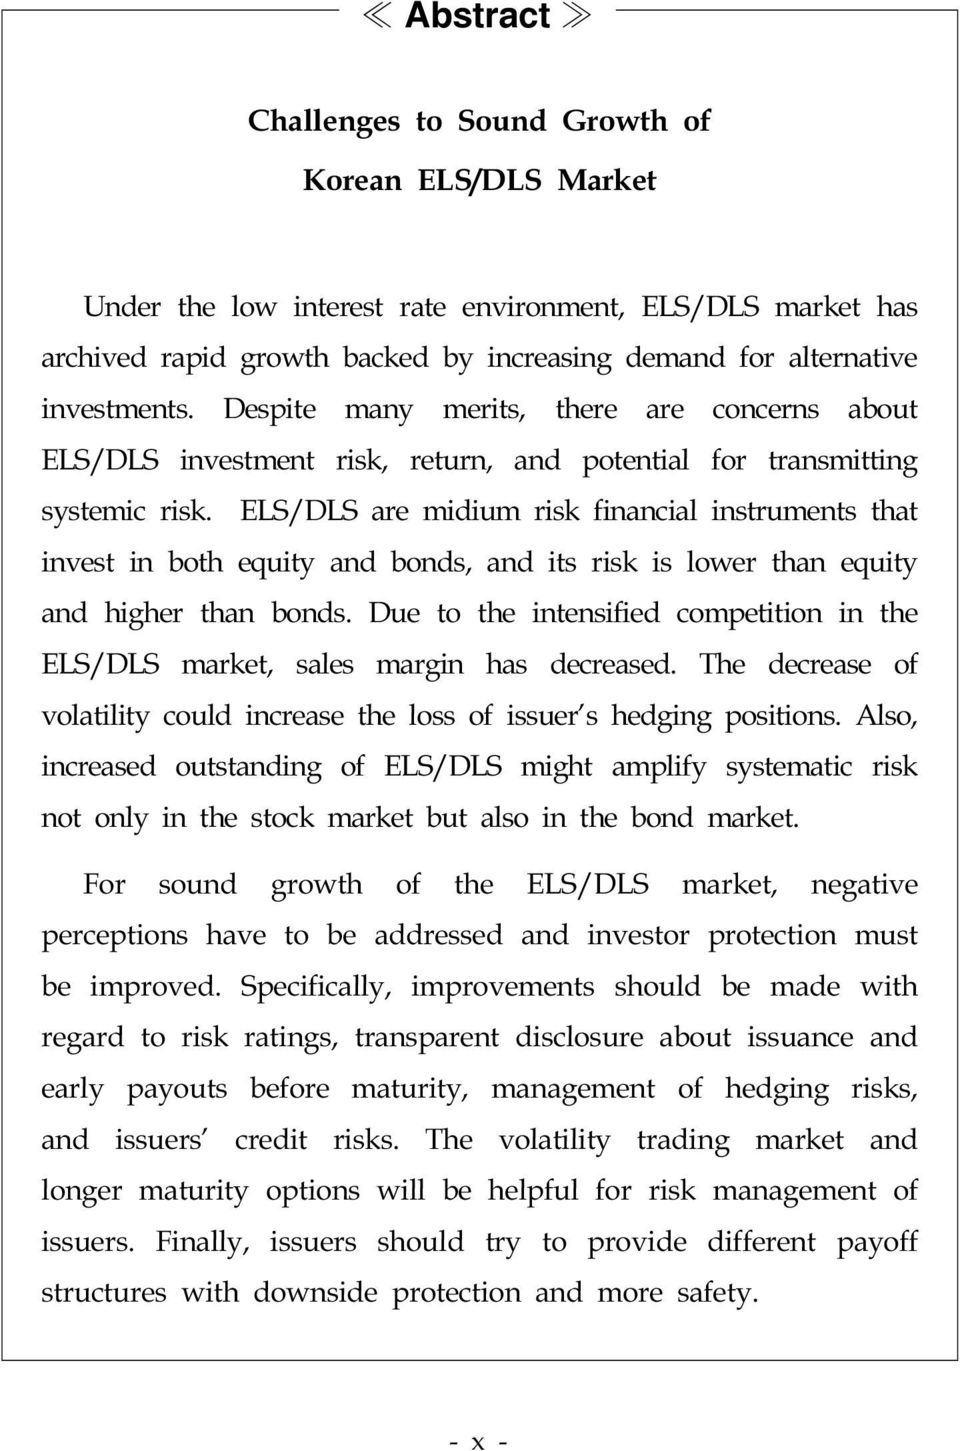 ELS/DLS are midium risk financial instruments that invest in both equity and bonds, and its risk is lower than equity and higher than bonds.